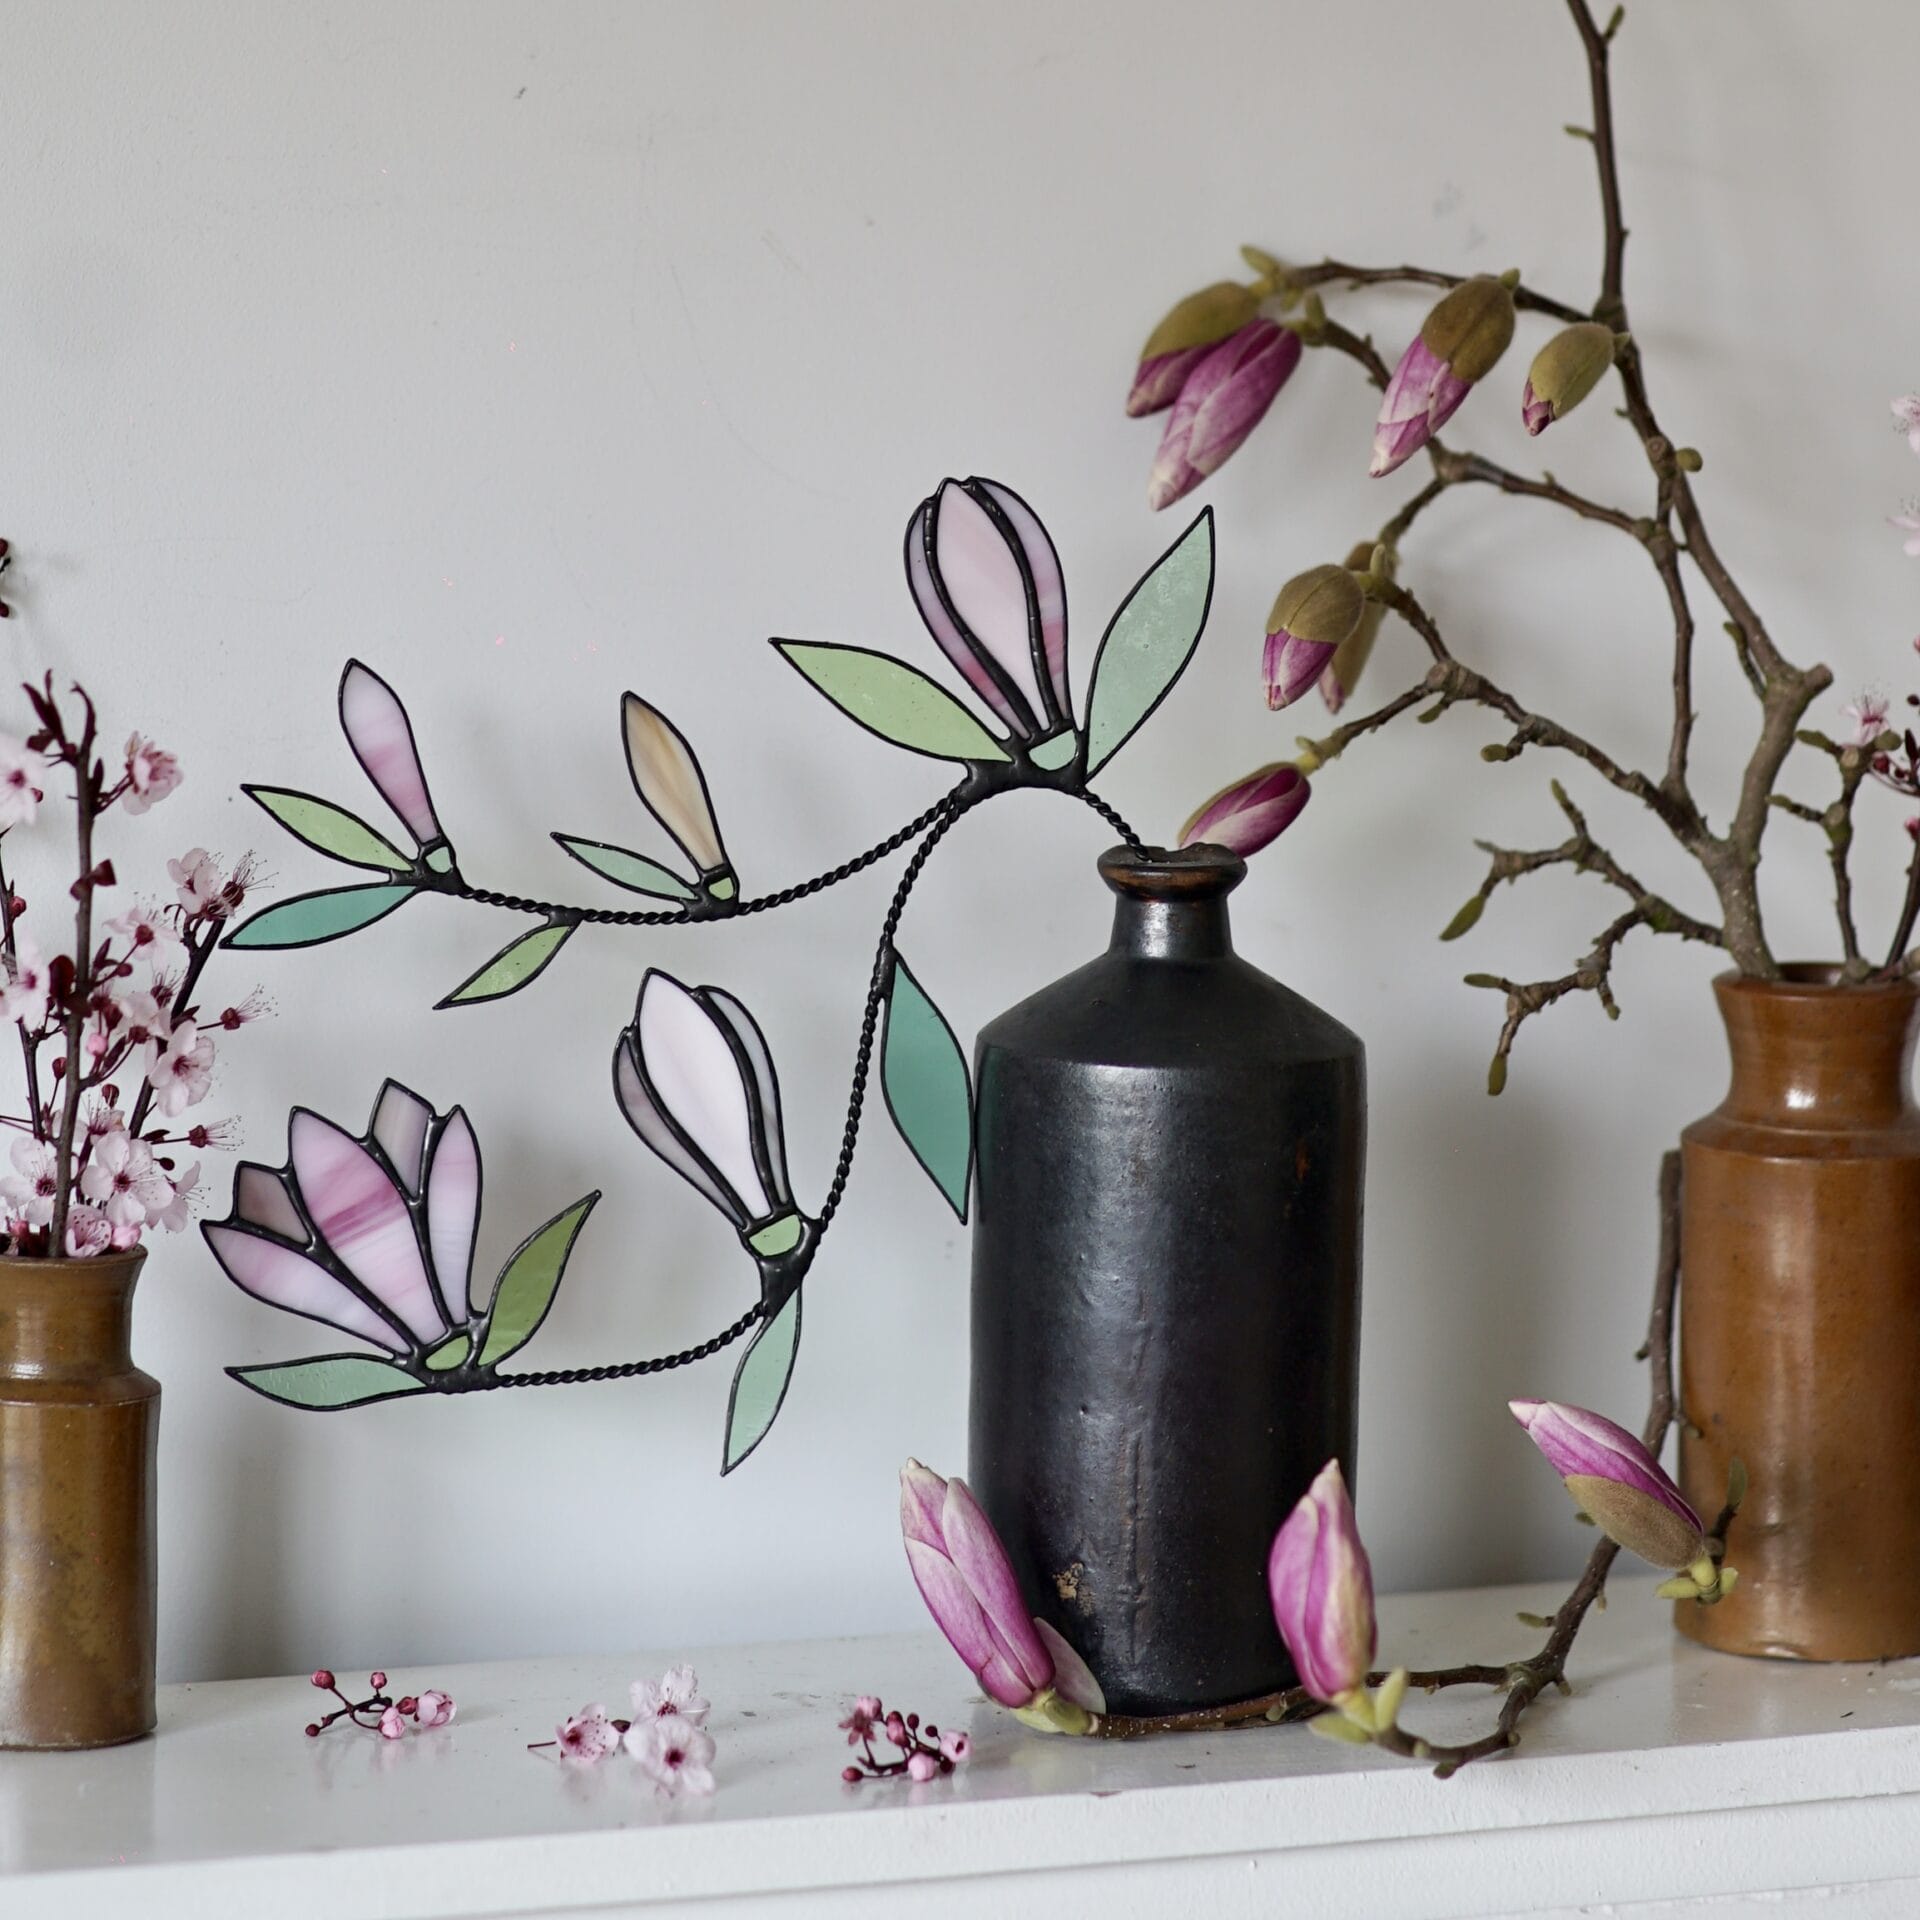 stained glass magnolia flowers and vines in ceramic vases alongside live specimens